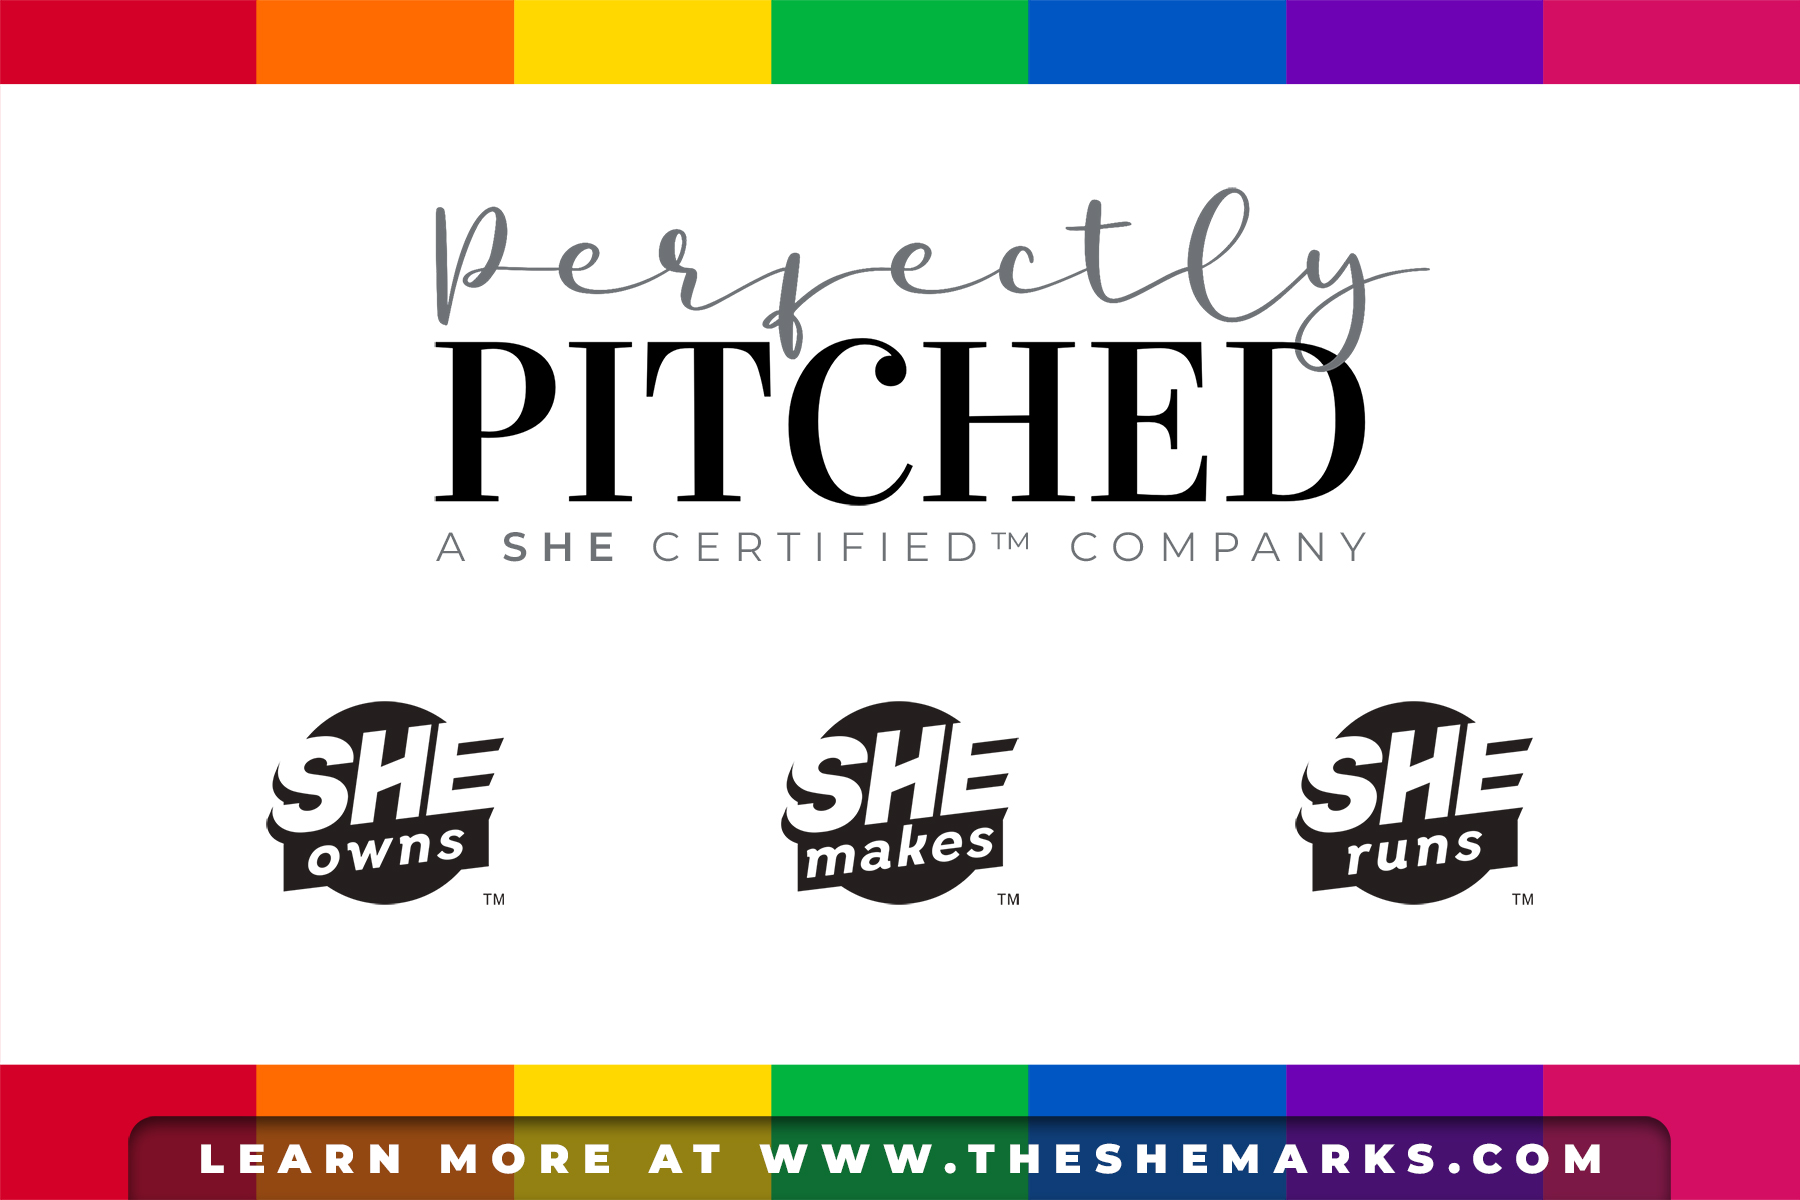 Perfectly Pitched, a SHE Certified™ Company - SHE Owns™, SHE Makes™, SHE Runs™ - Learn more at www.TheSHEMarks.com